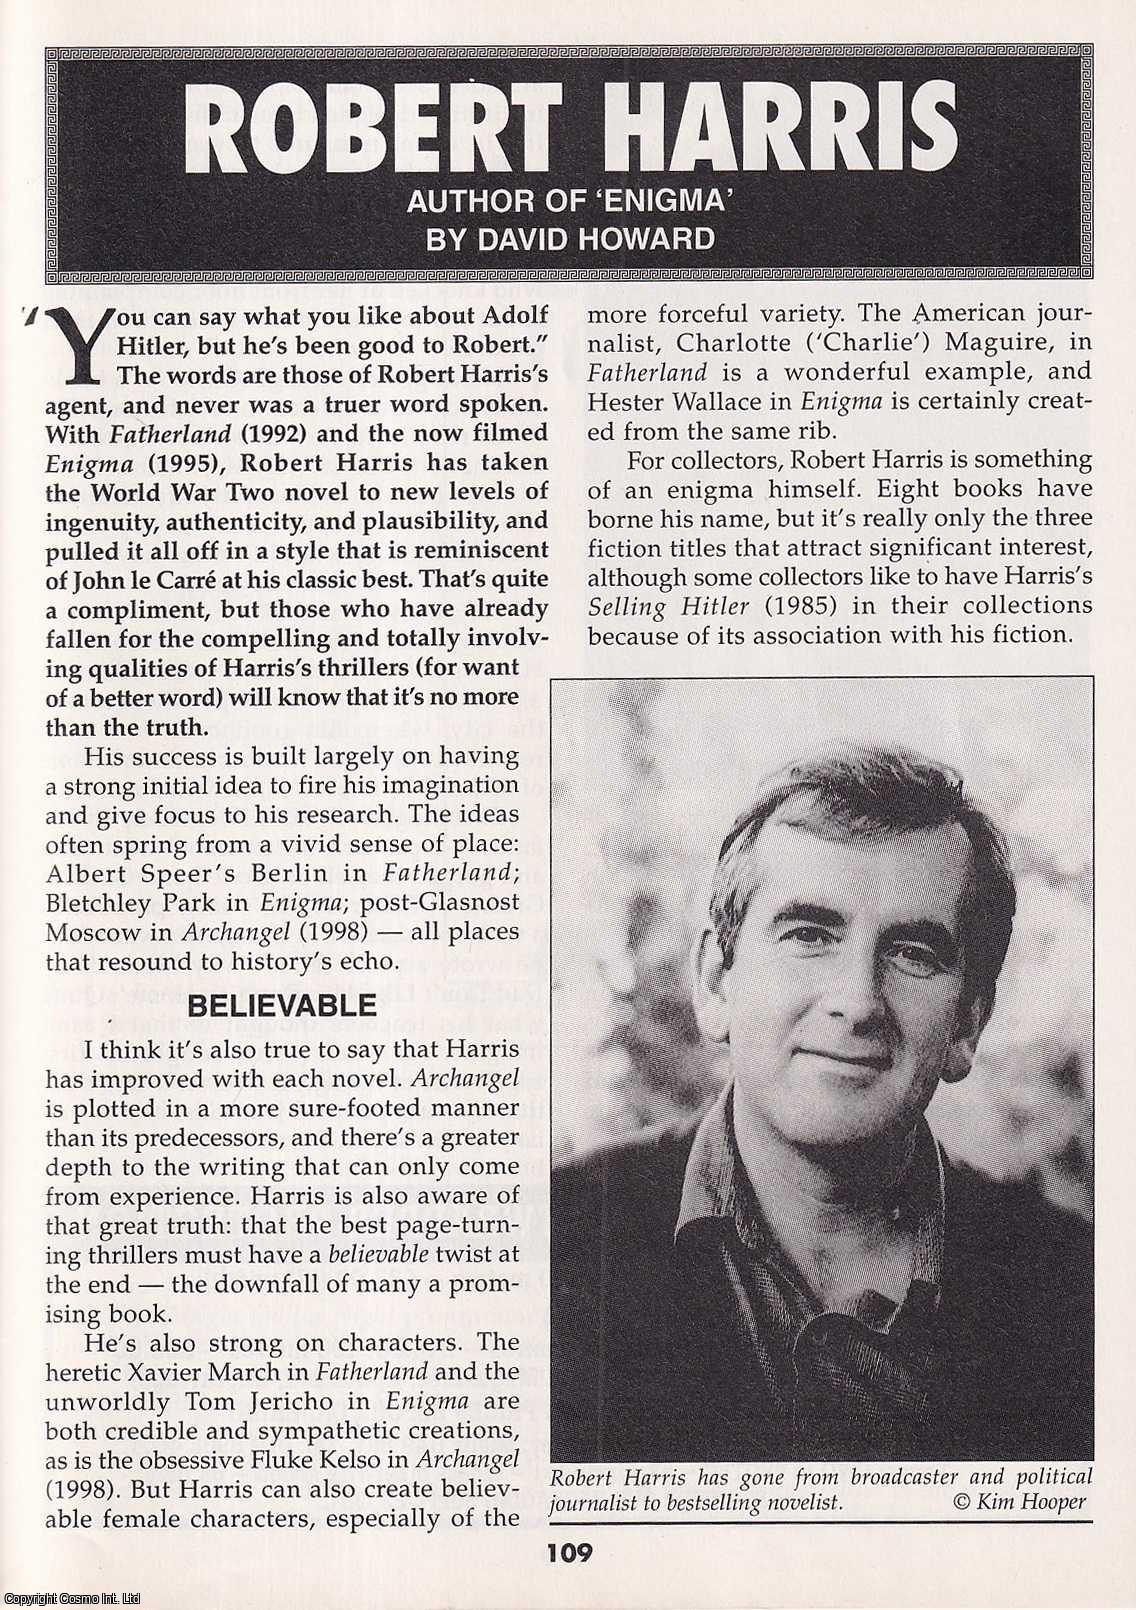 David Howard - Robert Harris. Author of Enigma. This is an original article separated from an issue of The Book & Magazine Collector publication.